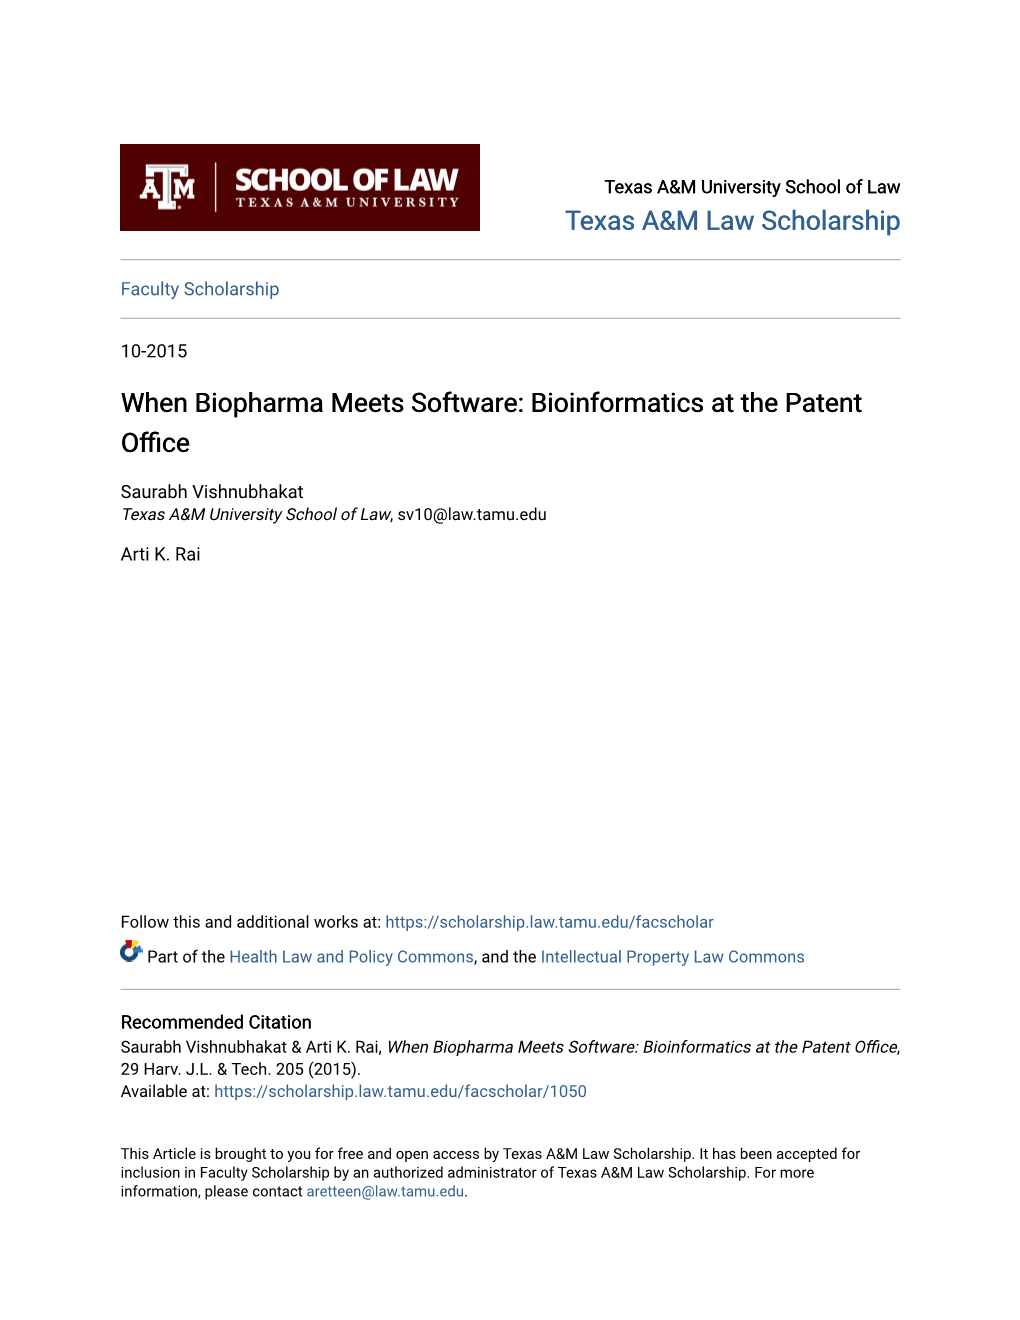 Bioinformatics at the Patent Office